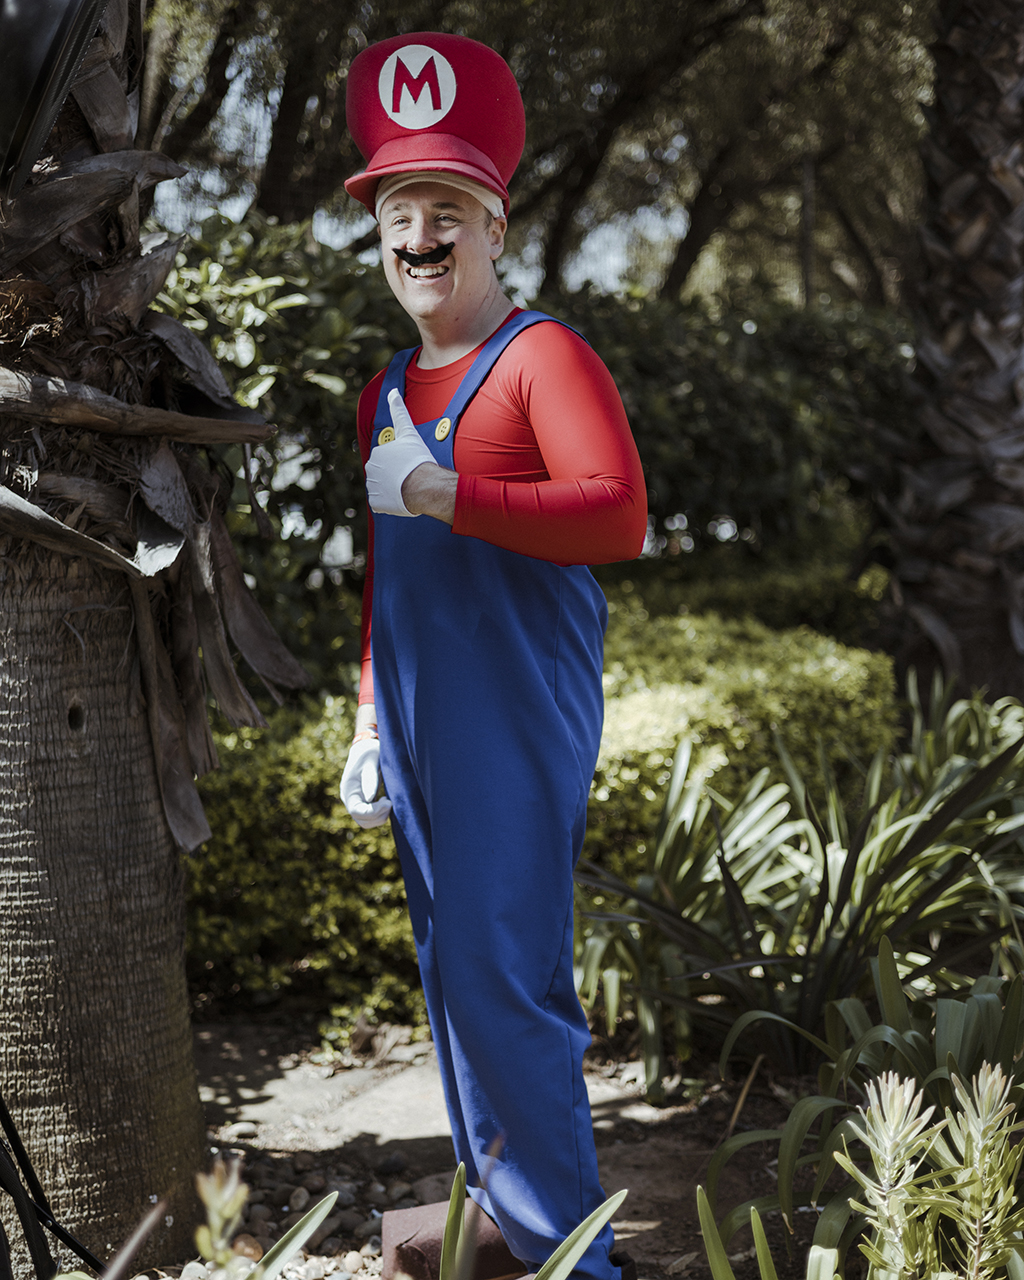 South African cosplayer Andries Burger, 33, poses for a portrait while dressed as the title character from the Super Mario franchise.